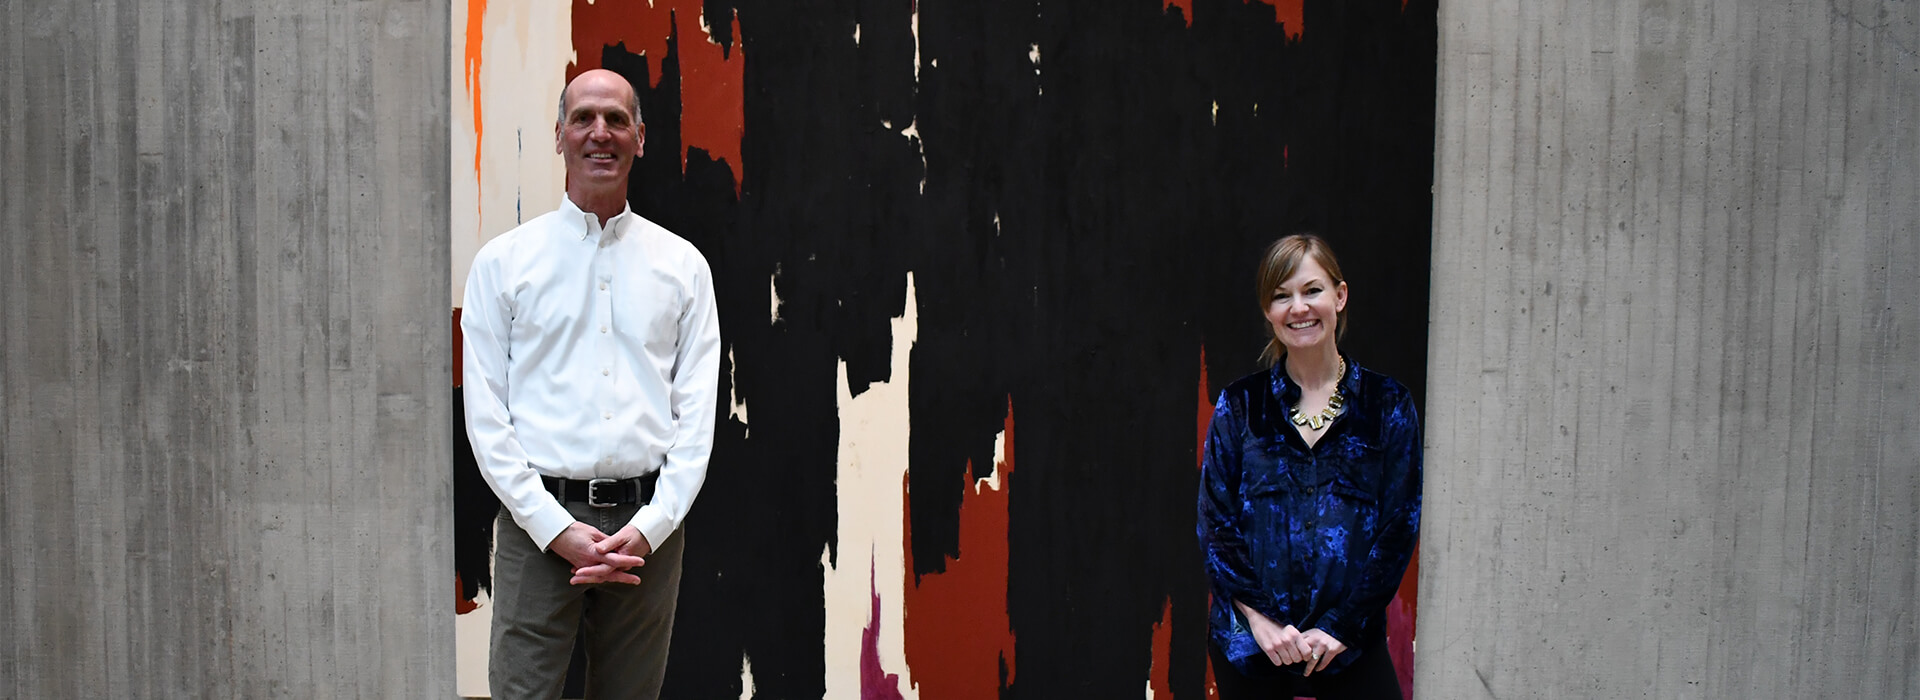 A man and woman stand in front of a large abstract black, red, white, and orange painting